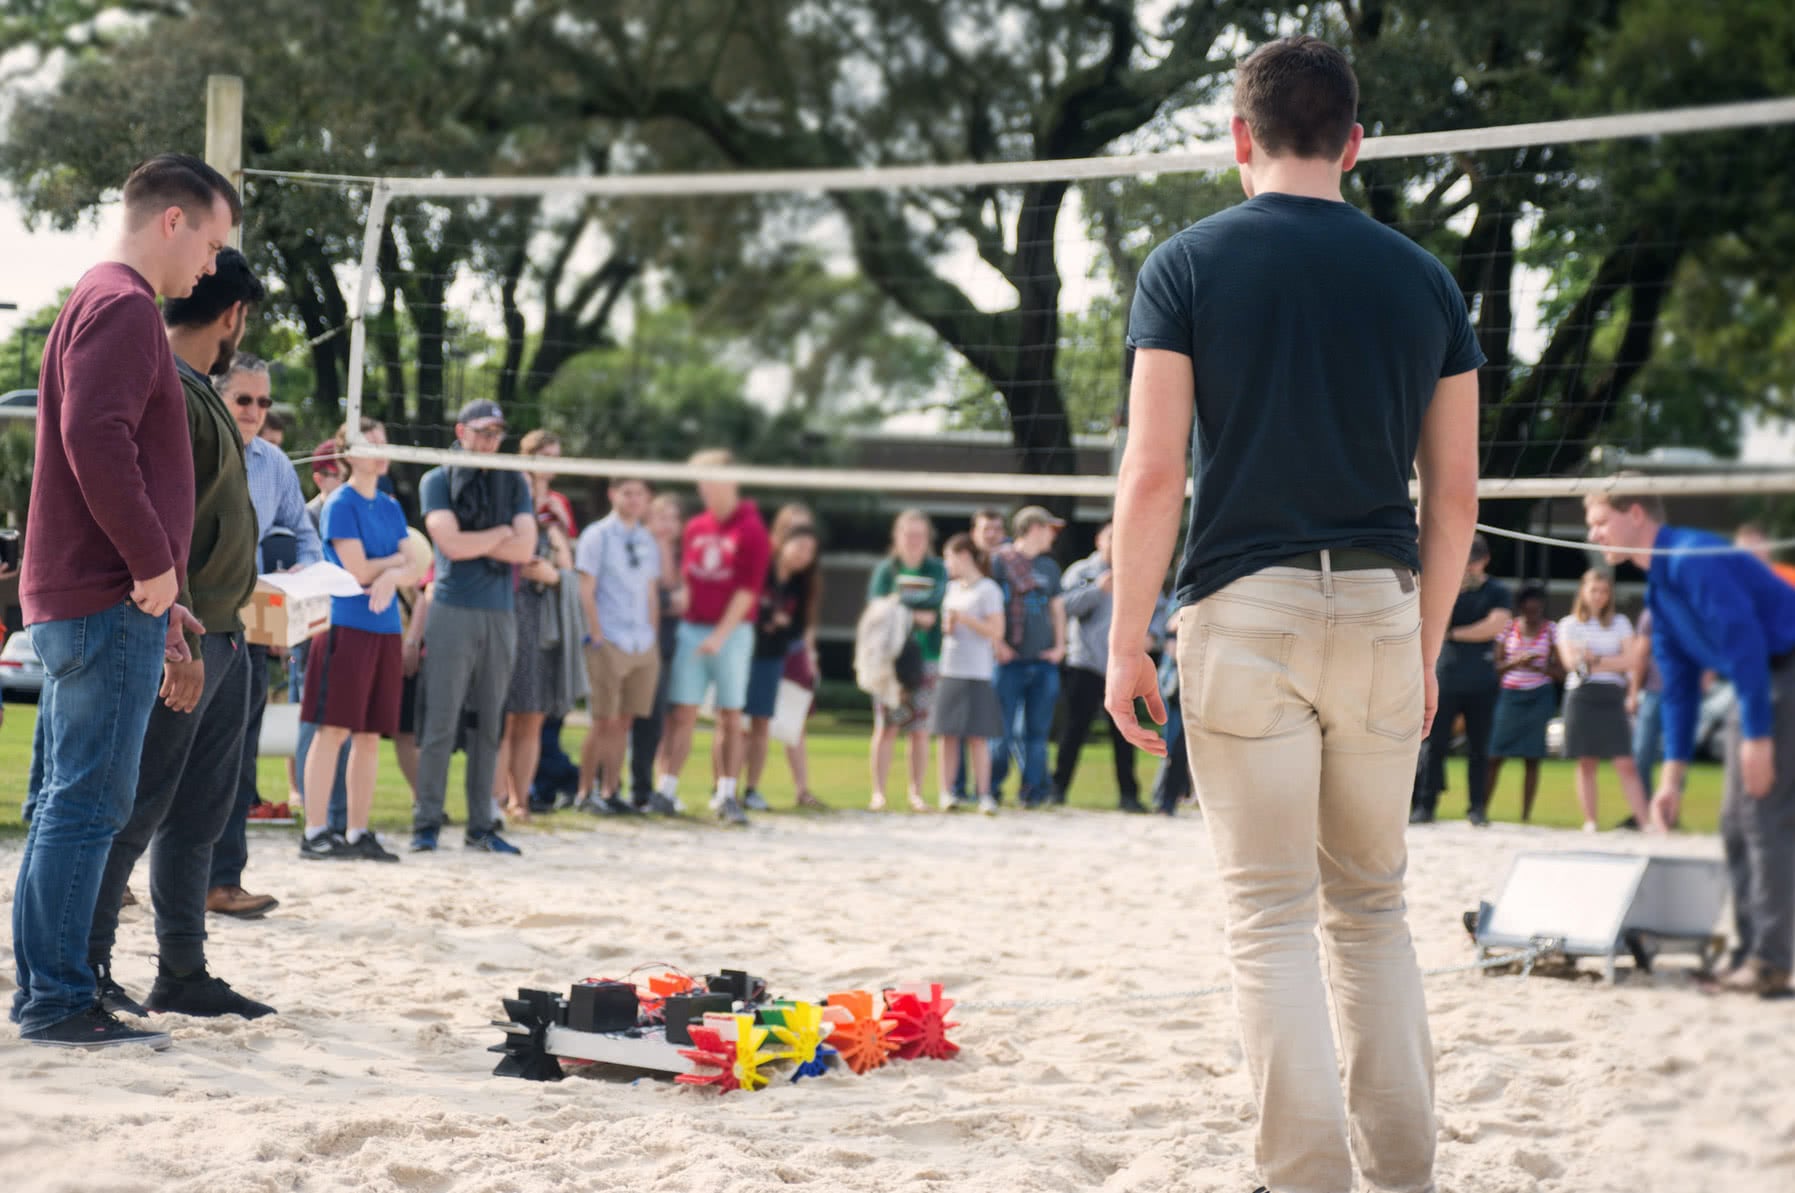 Students gathered around watching two robots play tug o' war on the sand volleyball court for the Engineering Design Contest.